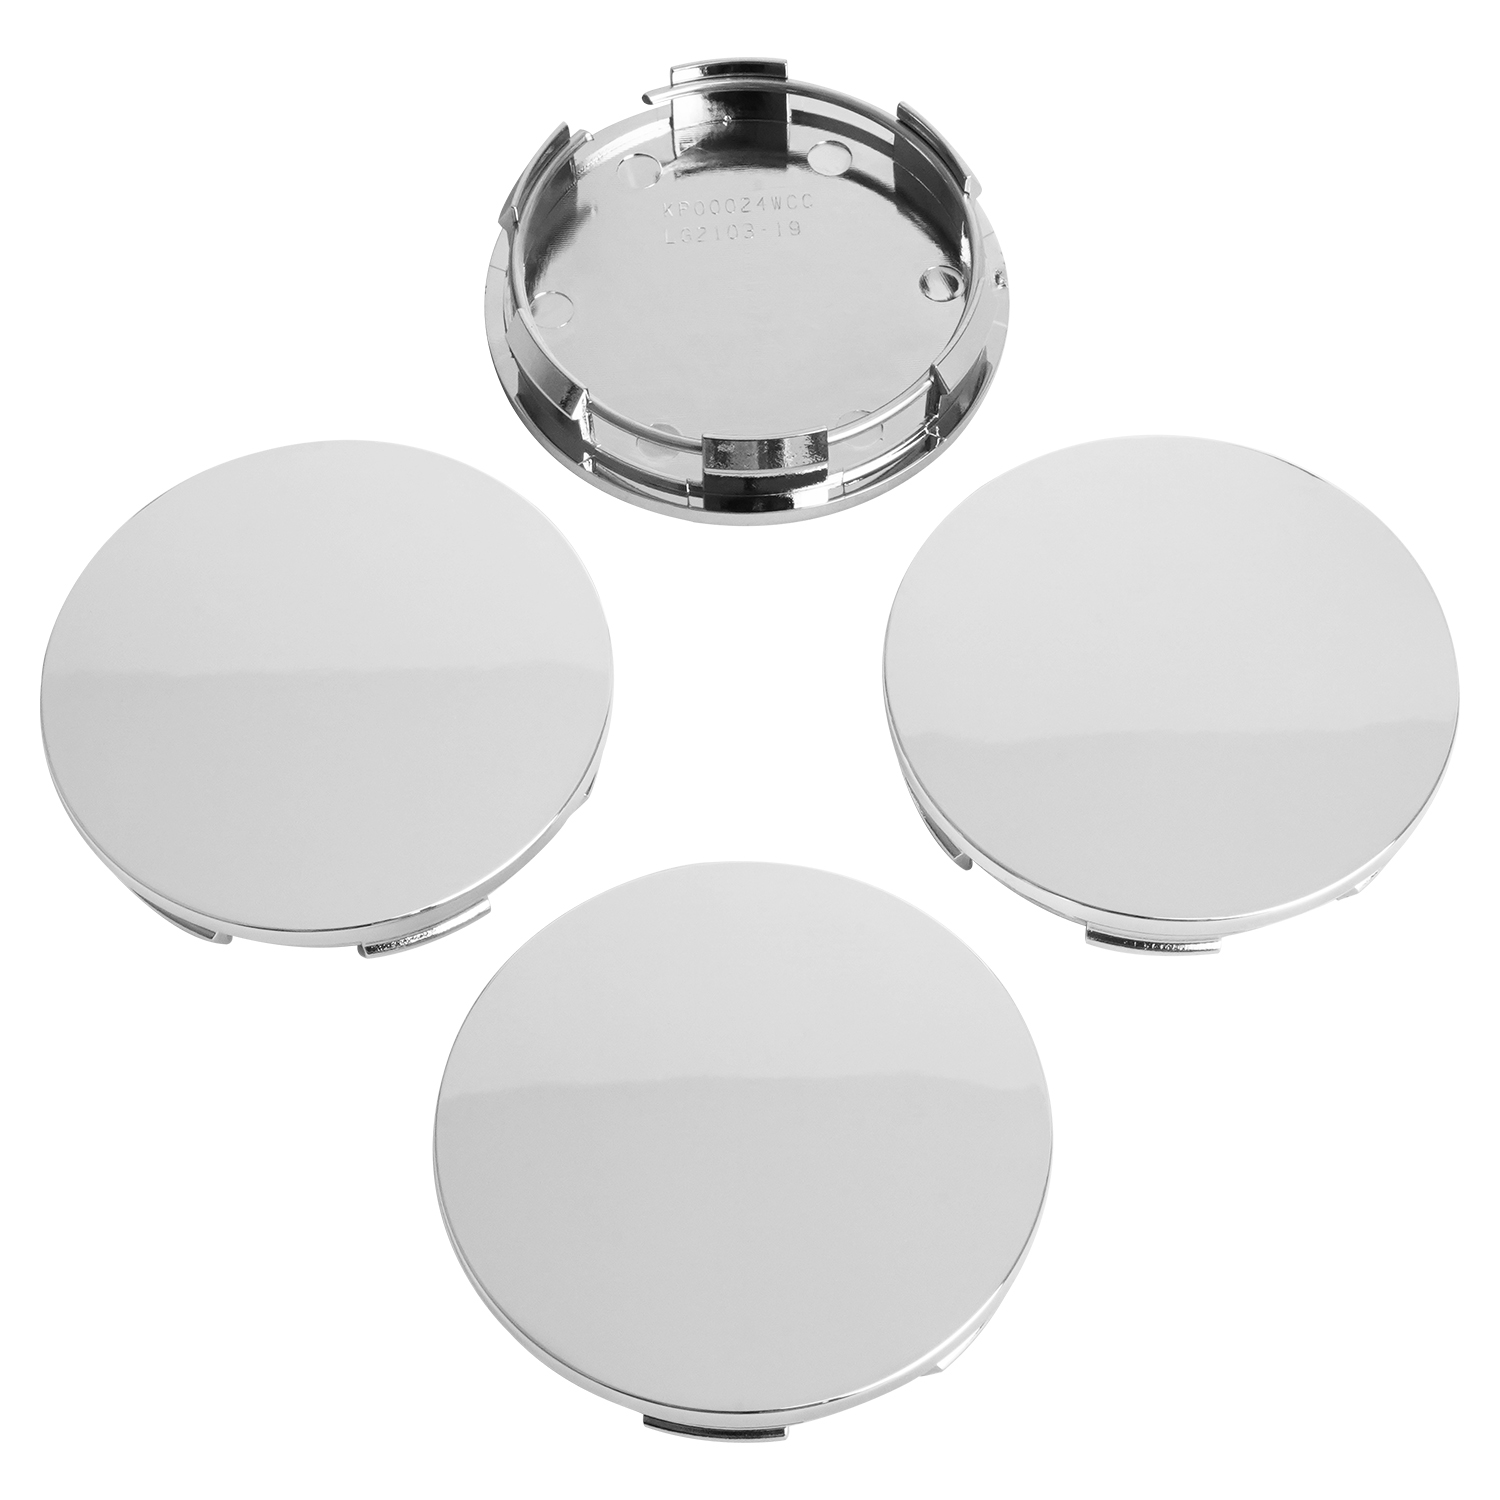 Set of 4 Chrome, Outer 69mm / Inner 64mm KitsPro 69mm 2.7 Wheel Center Caps for 44732-S9A-A00 Accord Civic CRV Pilot and More Center Caps